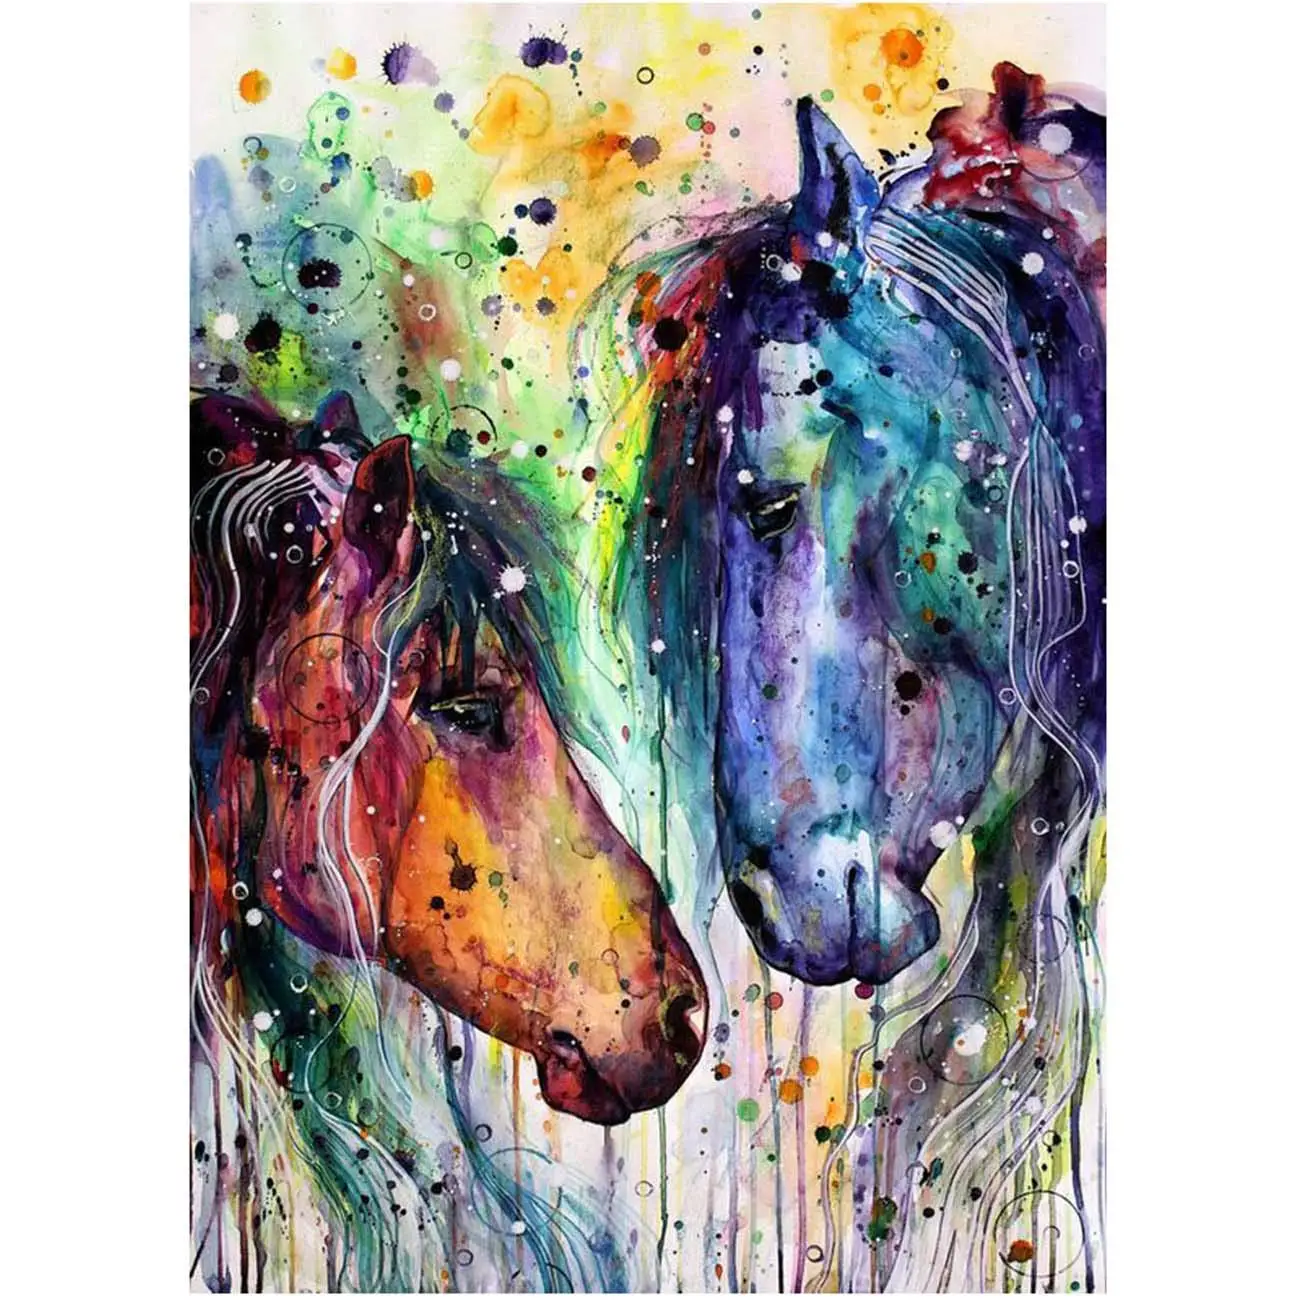 

5D Diamond Painting Watercolor Painting of Two Horses Full Drill by Number Kits for Adults, DIY Diamond Set Arts Craft a0934